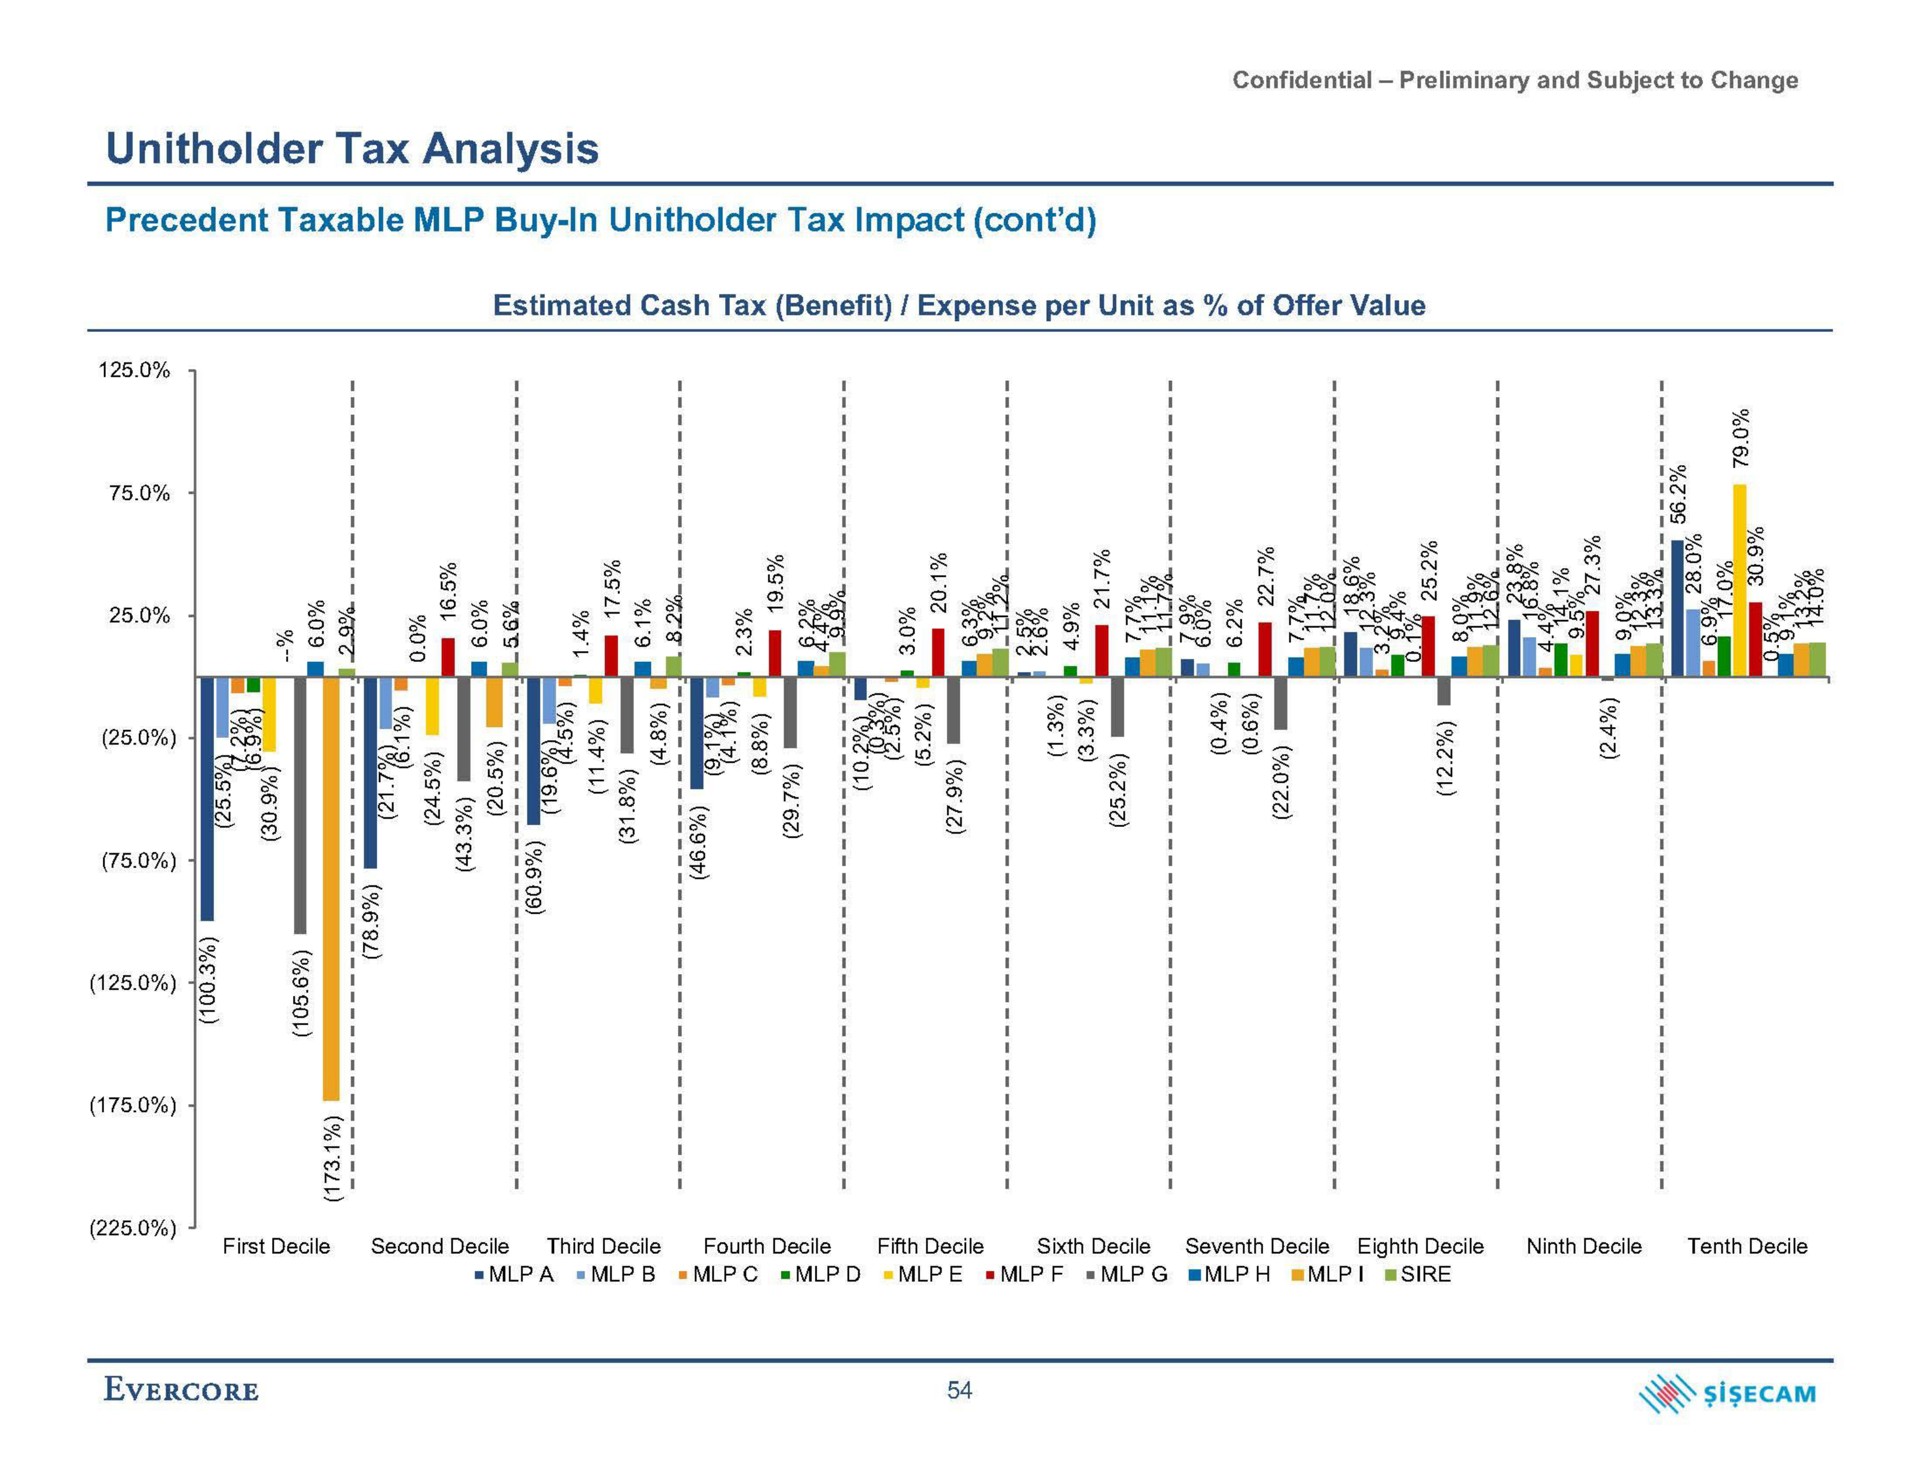 tax analysis precedent taxable buy in tax impact | Evercore